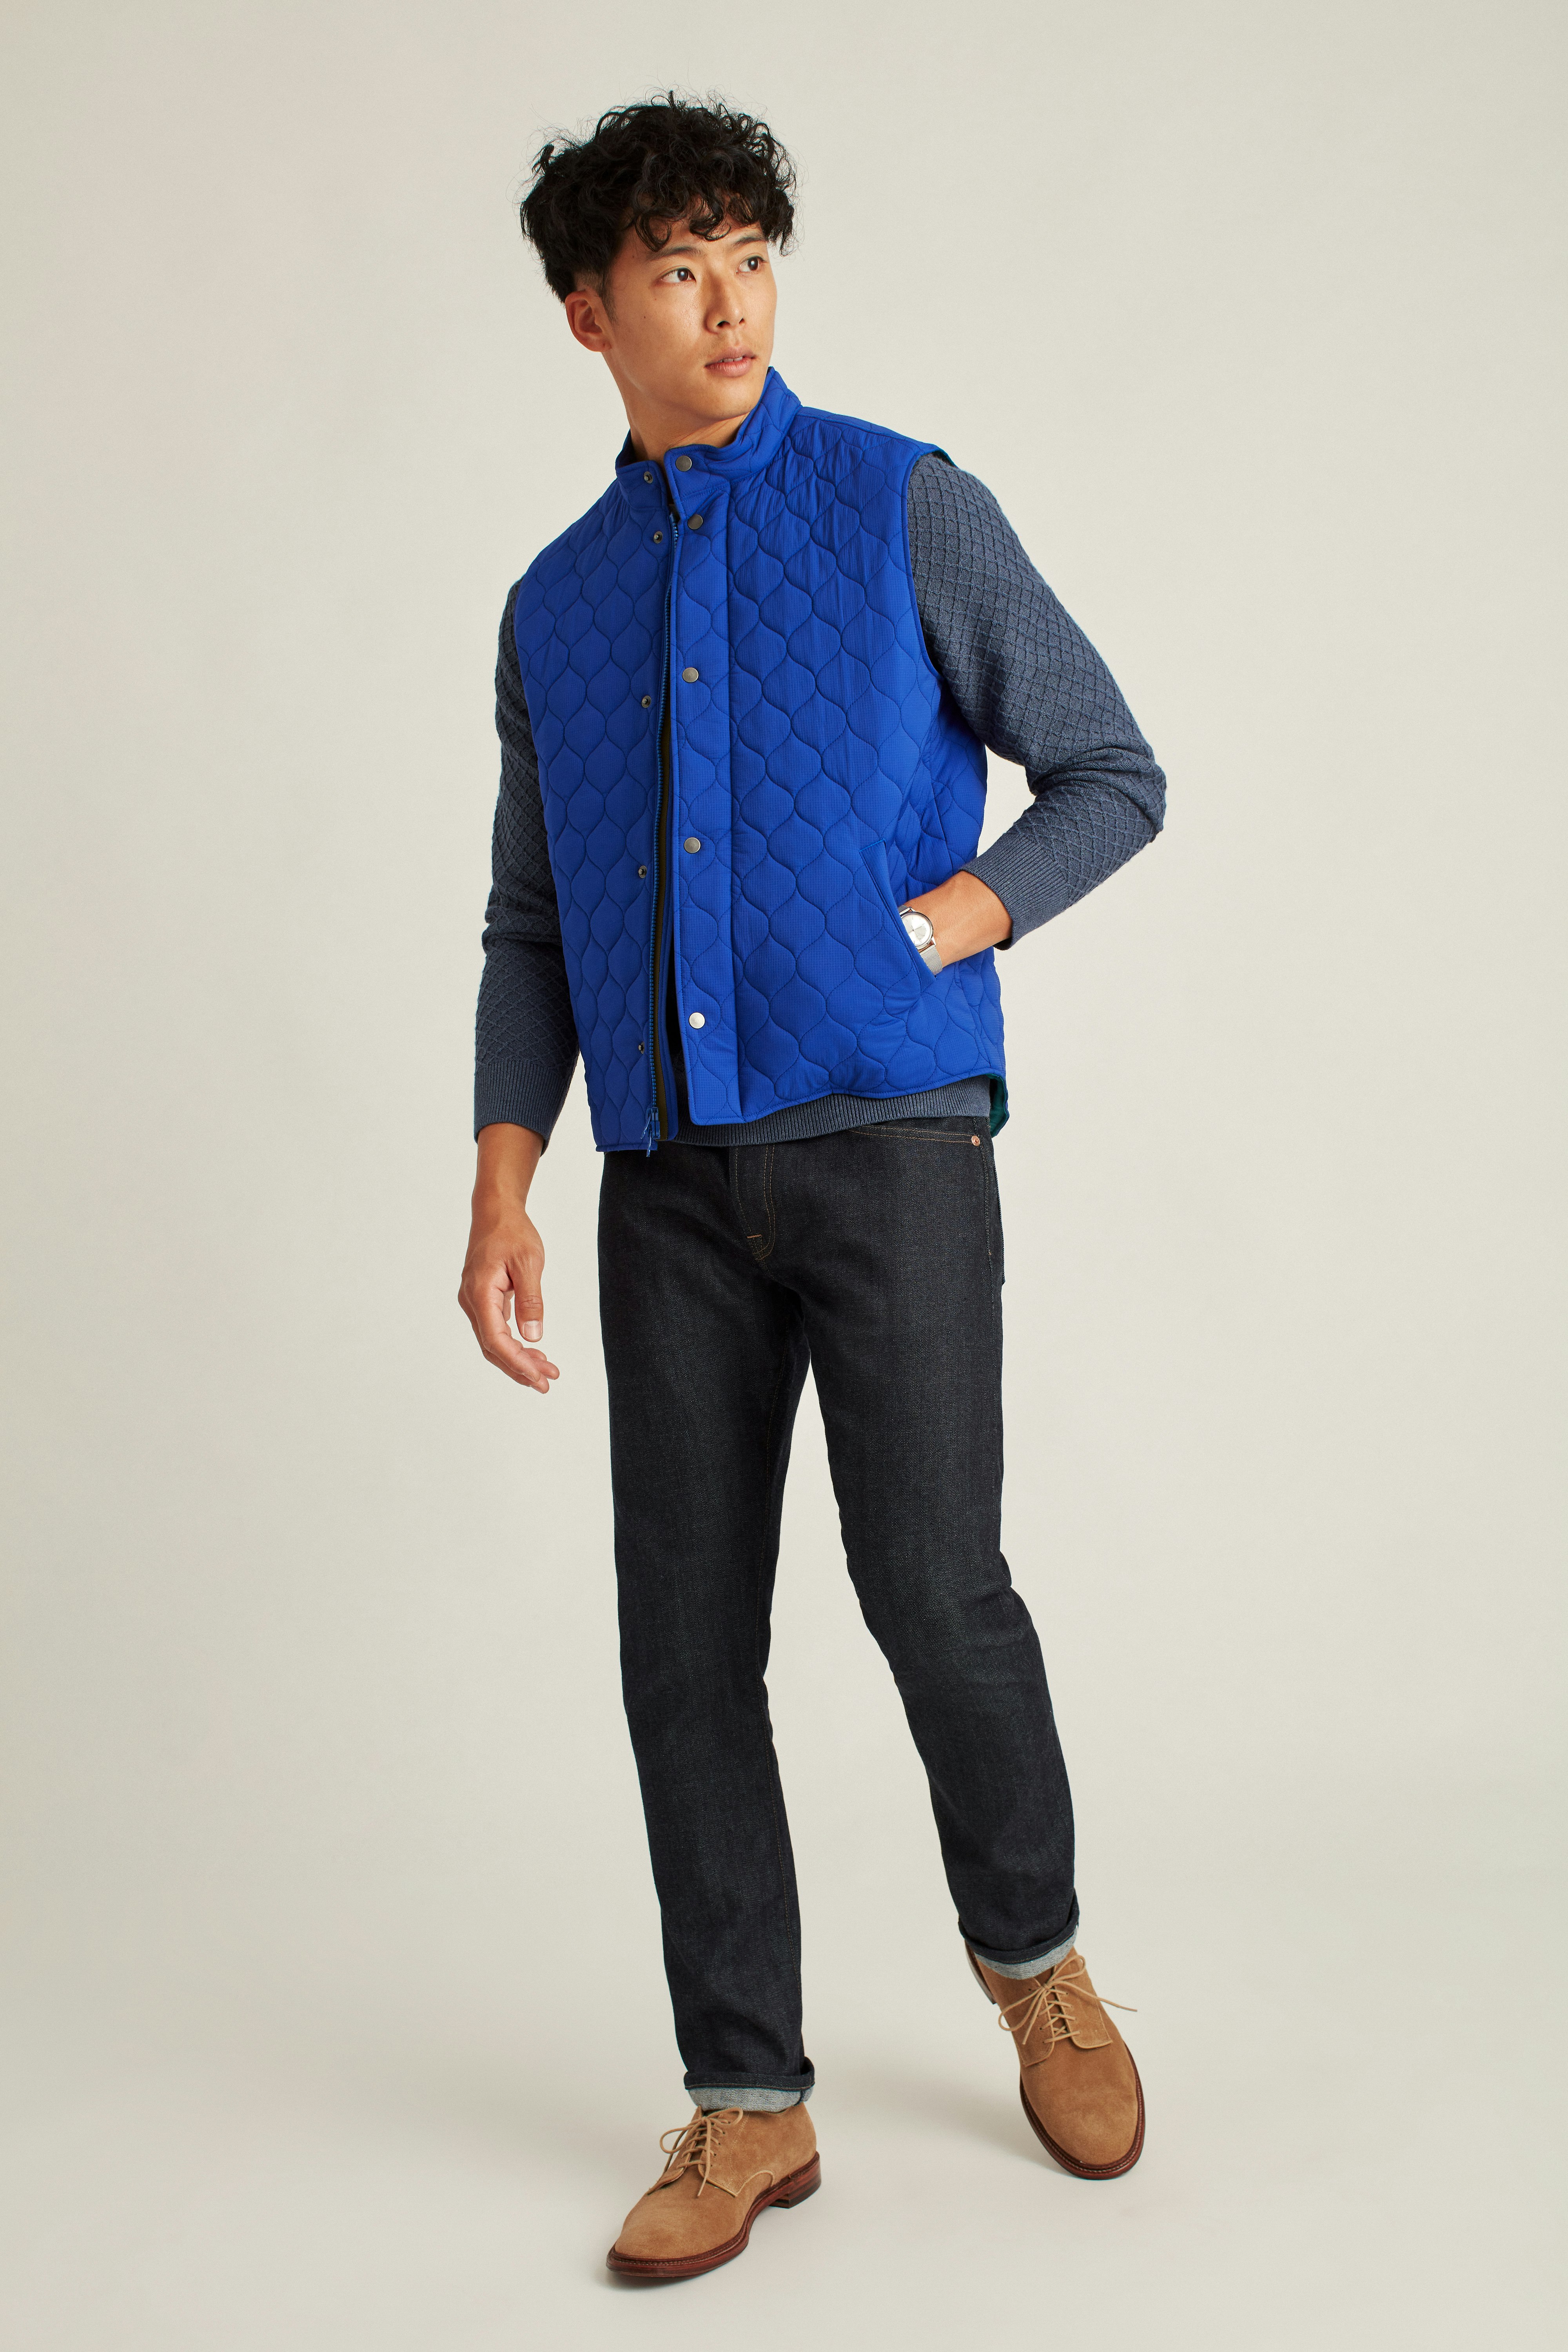 The Lightweight Quilted Vest